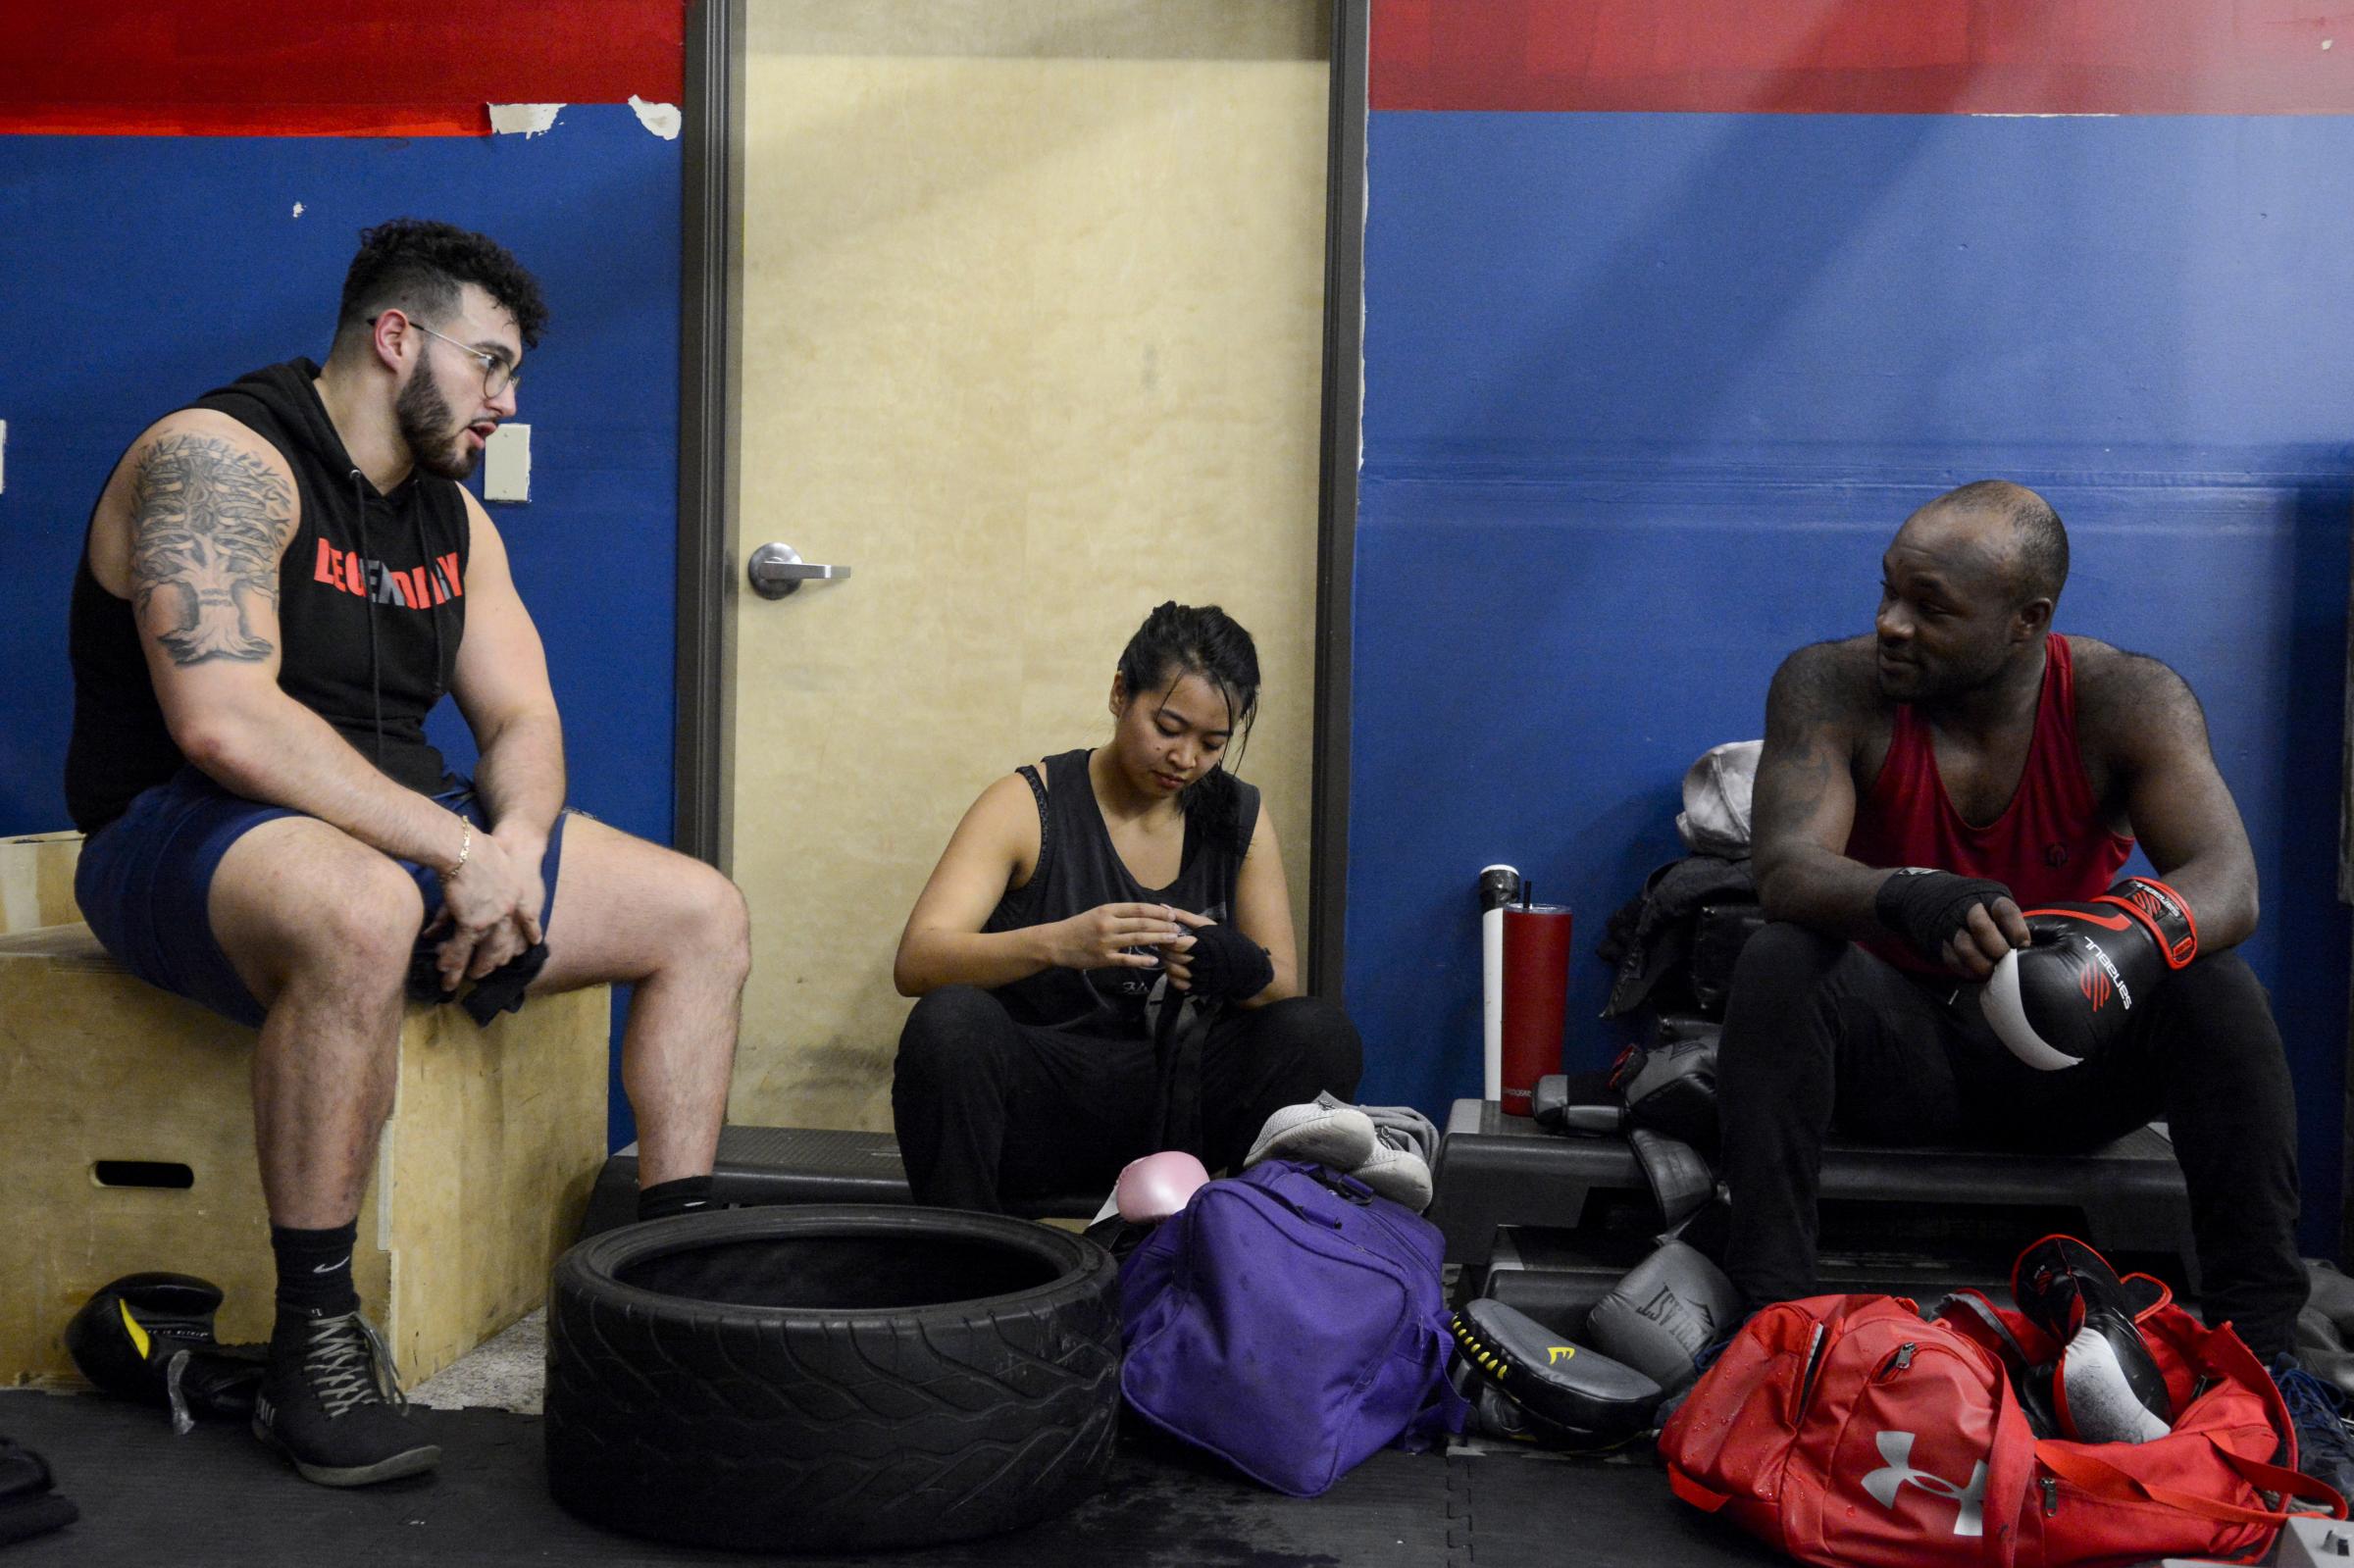 Making noise, breaking tradition - Marielle sits between Daniel Ostrovskiny and Mason Arnett...